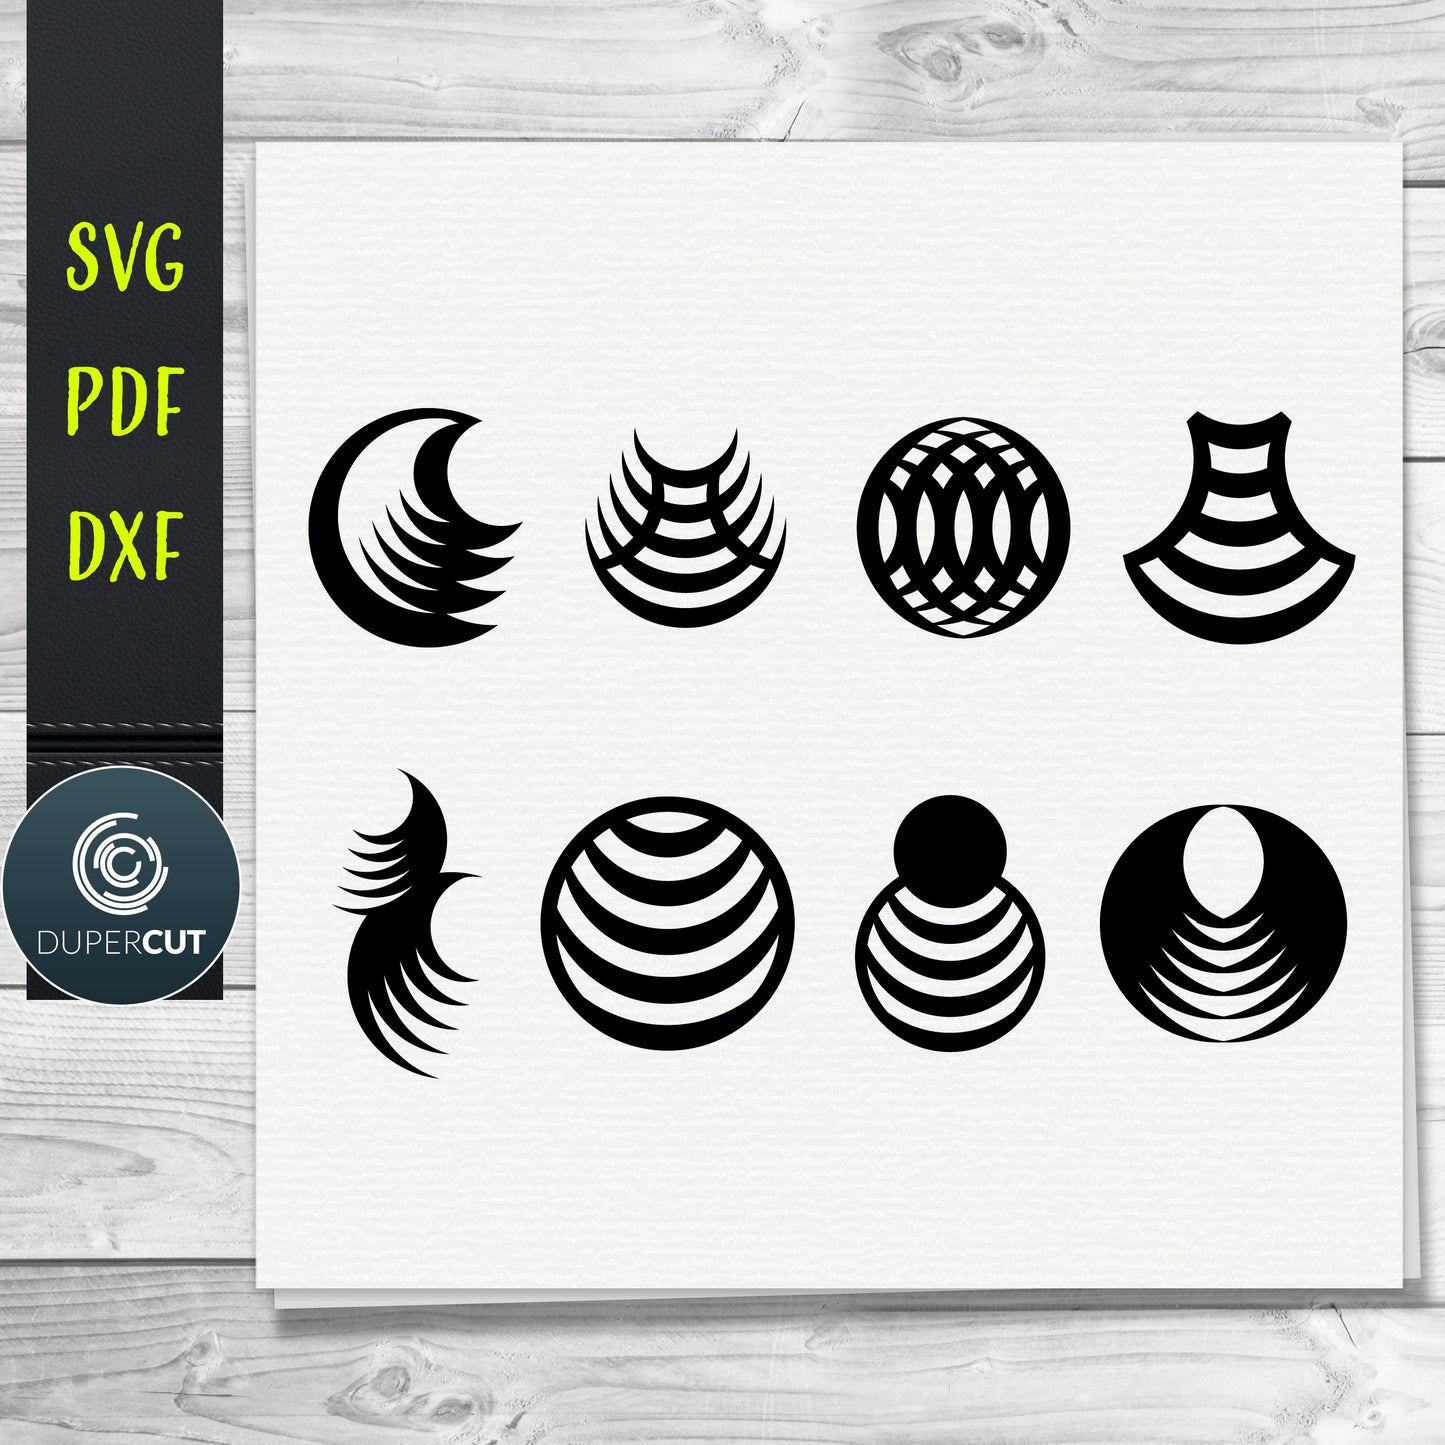 Circle round Leather Earrings SVG PDF DXF vector files. Jewellery making template for laser and cutting machines - Glowforge, Cricut, Silhouette Cameo.